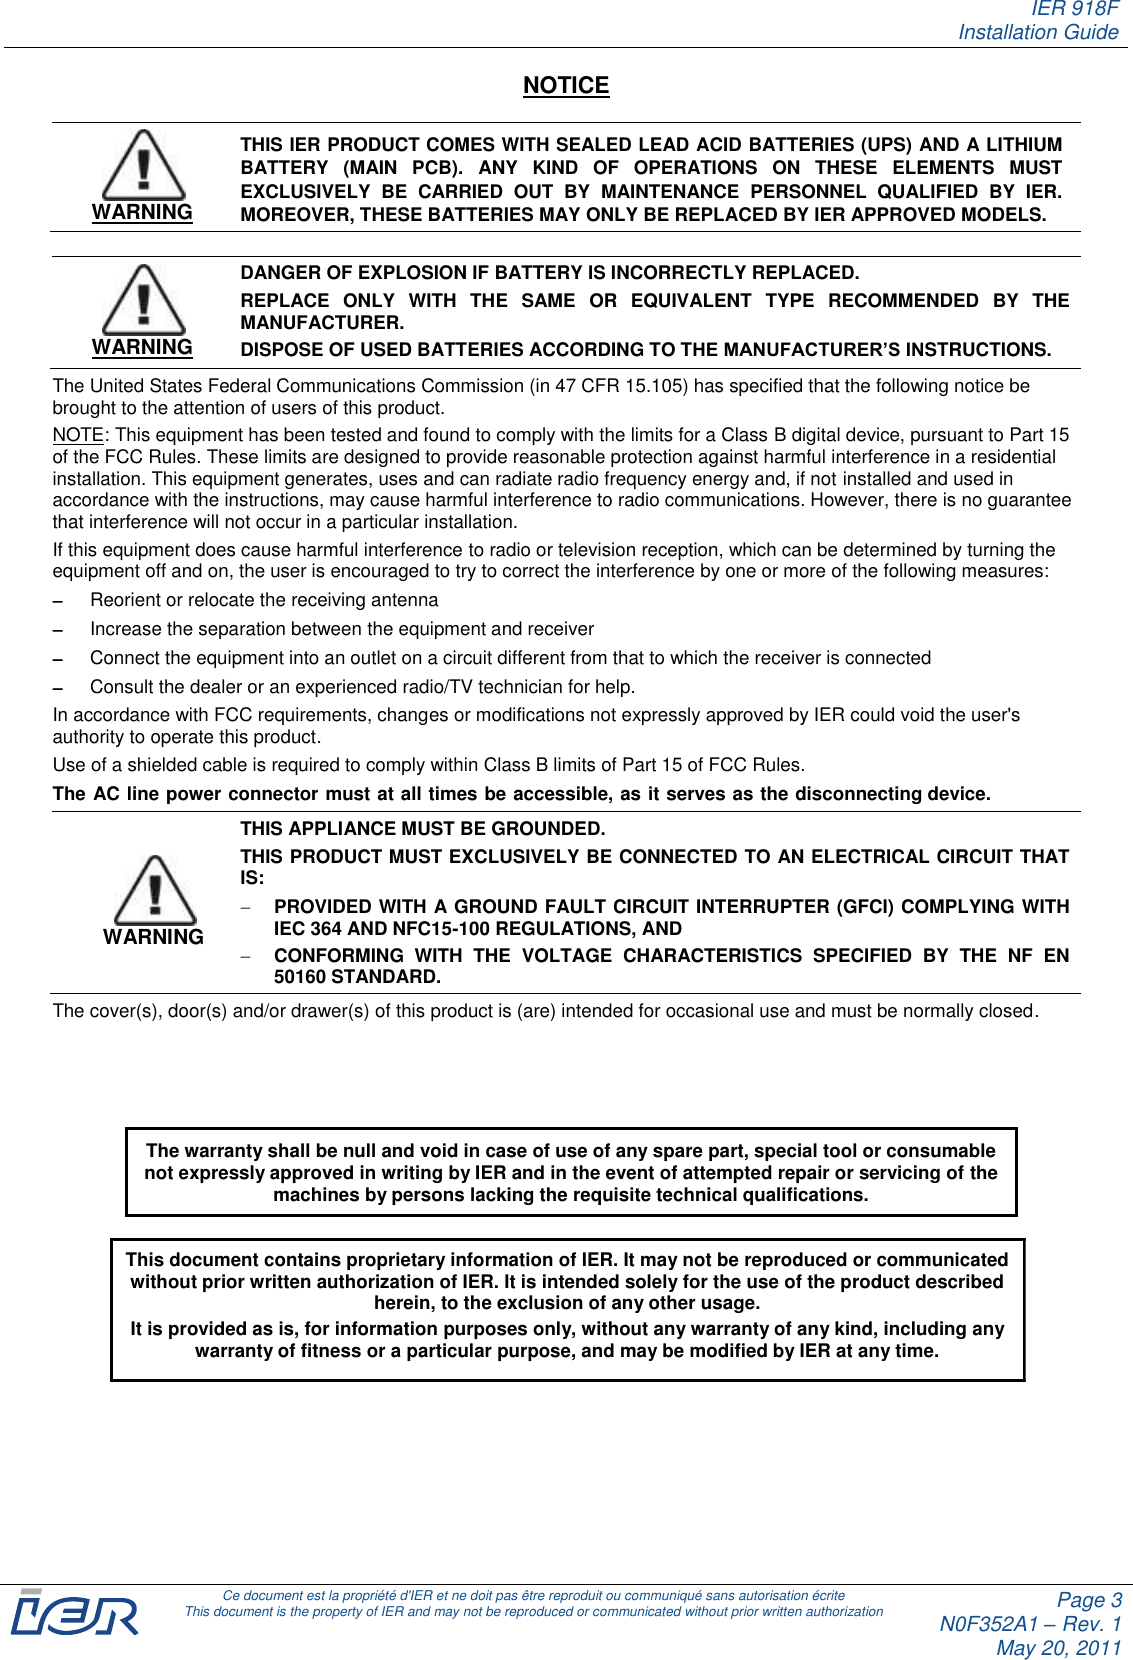 IER 918F Installation Guide   Ce document est la propriété d&apos;IER et ne doit pas être reproduit ou communiqué sans autorisation écrite This document is the property of IER and may not be reproduced or communicated without prior written authorization Page 3 N0F352A1 – Rev. 1 May 20, 2011  NOTICE  WARNING THIS IER PRODUCT COMES WITH SEALED LEAD ACID BATTERIES (UPS) AND A LITHIUM BATTERY  (MAIN  PCB).  ANY  KIND  OF  OPERATIONS  ON  THESE  ELEMENTS  MUST EXCLUSIVELY  BE  CARRIED  OUT  BY  MAINTENANCE  PERSONNEL  QUALIFIED  BY  IER. MOREOVER, THESE BATTERIES MAY ONLY BE REPLACED BY IER APPROVED MODELS.  WARNING DANGER OF EXPLOSION IF BATTERY IS INCORRECTLY REPLACED.  REPLACE  ONLY  WITH  THE  SAME  OR  EQUIVALENT  TYPE  RECOMMENDED  BY  THE MANUFACTURER. DISPOSE OF USED BATTERIES ACCORDING TO THE MANUFACTURER’S INSTRUCTIONS. The United States Federal Communications Commission (in 47 CFR 15.105) has specified that the following notice be brought to the attention of users of this product. NOTE: This equipment has been tested and found to comply with the limits for a Class B digital device, pursuant to Part 15 of the FCC Rules. These limits are designed to provide reasonable protection against harmful interference in a residential installation. This equipment generates, uses and can radiate radio frequency energy and, if not installed and used in accordance with the instructions, may cause harmful interference to radio communications. However, there is no guarantee that interference will not occur in a particular installation. If this equipment does cause harmful interference to radio or television reception, which can be determined by turning the equipment off and on, the user is encouraged to try to correct the interference by one or more of the following measures:  Reorient or relocate the receiving antenna  Increase the separation between the equipment and receiver  Connect the equipment into an outlet on a circuit different from that to which the receiver is connected  Consult the dealer or an experienced radio/TV technician for help. In accordance with FCC requirements, changes or modifications not expressly approved by IER could void the user&apos;s authority to operate this product. Use of a shielded cable is required to comply within Class B limits of Part 15 of FCC Rules. The AC line power connector must at all times be accessible, as it serves as the disconnecting device. WARNING THIS APPLIANCE MUST BE GROUNDED. THIS PRODUCT MUST EXCLUSIVELY BE CONNECTED TO AN ELECTRICAL CIRCUIT THAT IS:  PROVIDED WITH A GROUND FAULT CIRCUIT INTERRUPTER (GFCI) COMPLYING WITH IEC 364 AND NFC15-100 REGULATIONS, AND  CONFORMING  WITH  THE  VOLTAGE  CHARACTERISTICS  SPECIFIED  BY  THE  NF  EN 50160 STANDARD. The cover(s), door(s) and/or drawer(s) of this product is (are) intended for occasional use and must be normally closed.          This document contains proprietary information of IER. It may not be reproduced or communicated without prior written authorization of IER. It is intended solely for the use of the product described herein, to the exclusion of any other usage.  It is provided as is, for information purposes only, without any warranty of any kind, including any warranty of fitness or a particular purpose, and may be modified by IER at any time. The warranty shall be null and void in case of use of any spare part, special tool or consumable not expressly approved in writing by IER and in the event of attempted repair or servicing of the machines by persons lacking the requisite technical qualifications. 